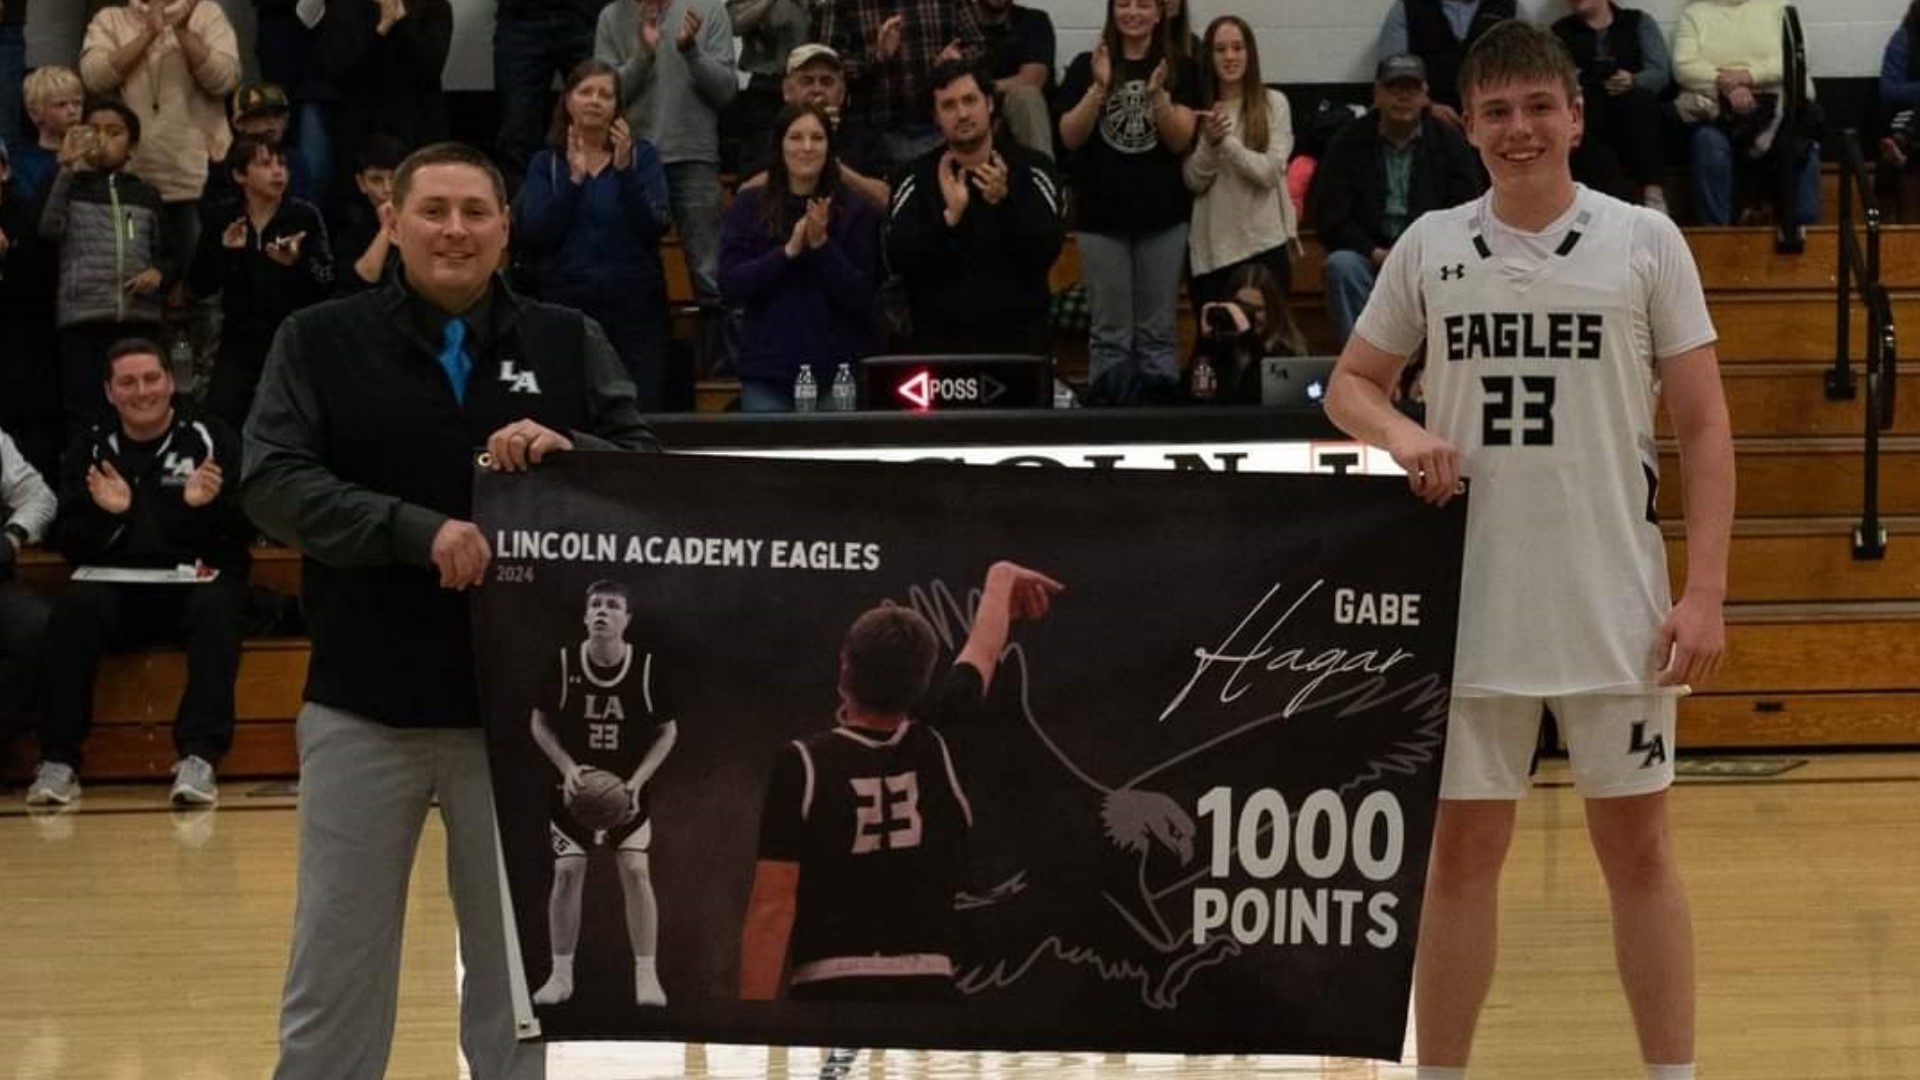 Lincoln Academy's first basketball tournament game is Friday, so Gabe Hager has played his last game at his home gym, but not without making history first.